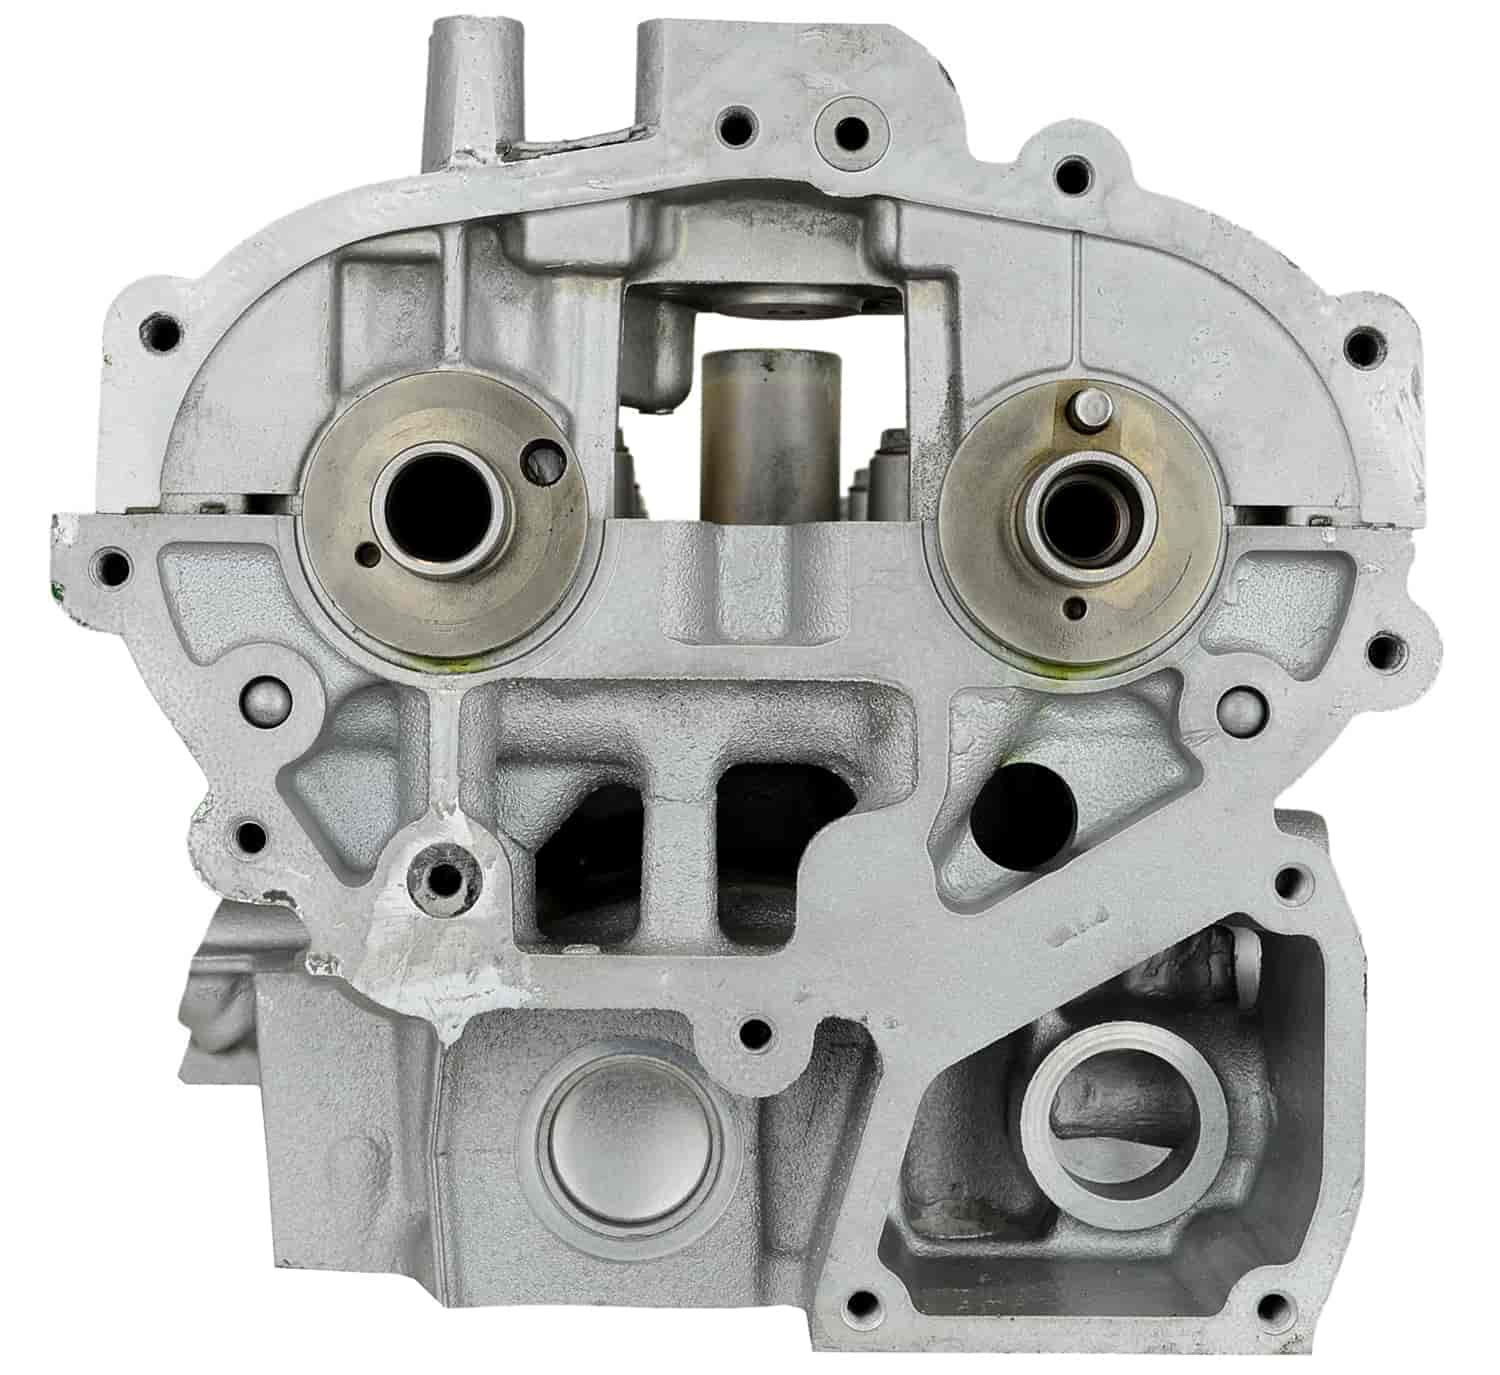 Remanufactured Cylinder Head for 2002-2009 Nissan/Infiniti with 3.5L V6 VQ35DE